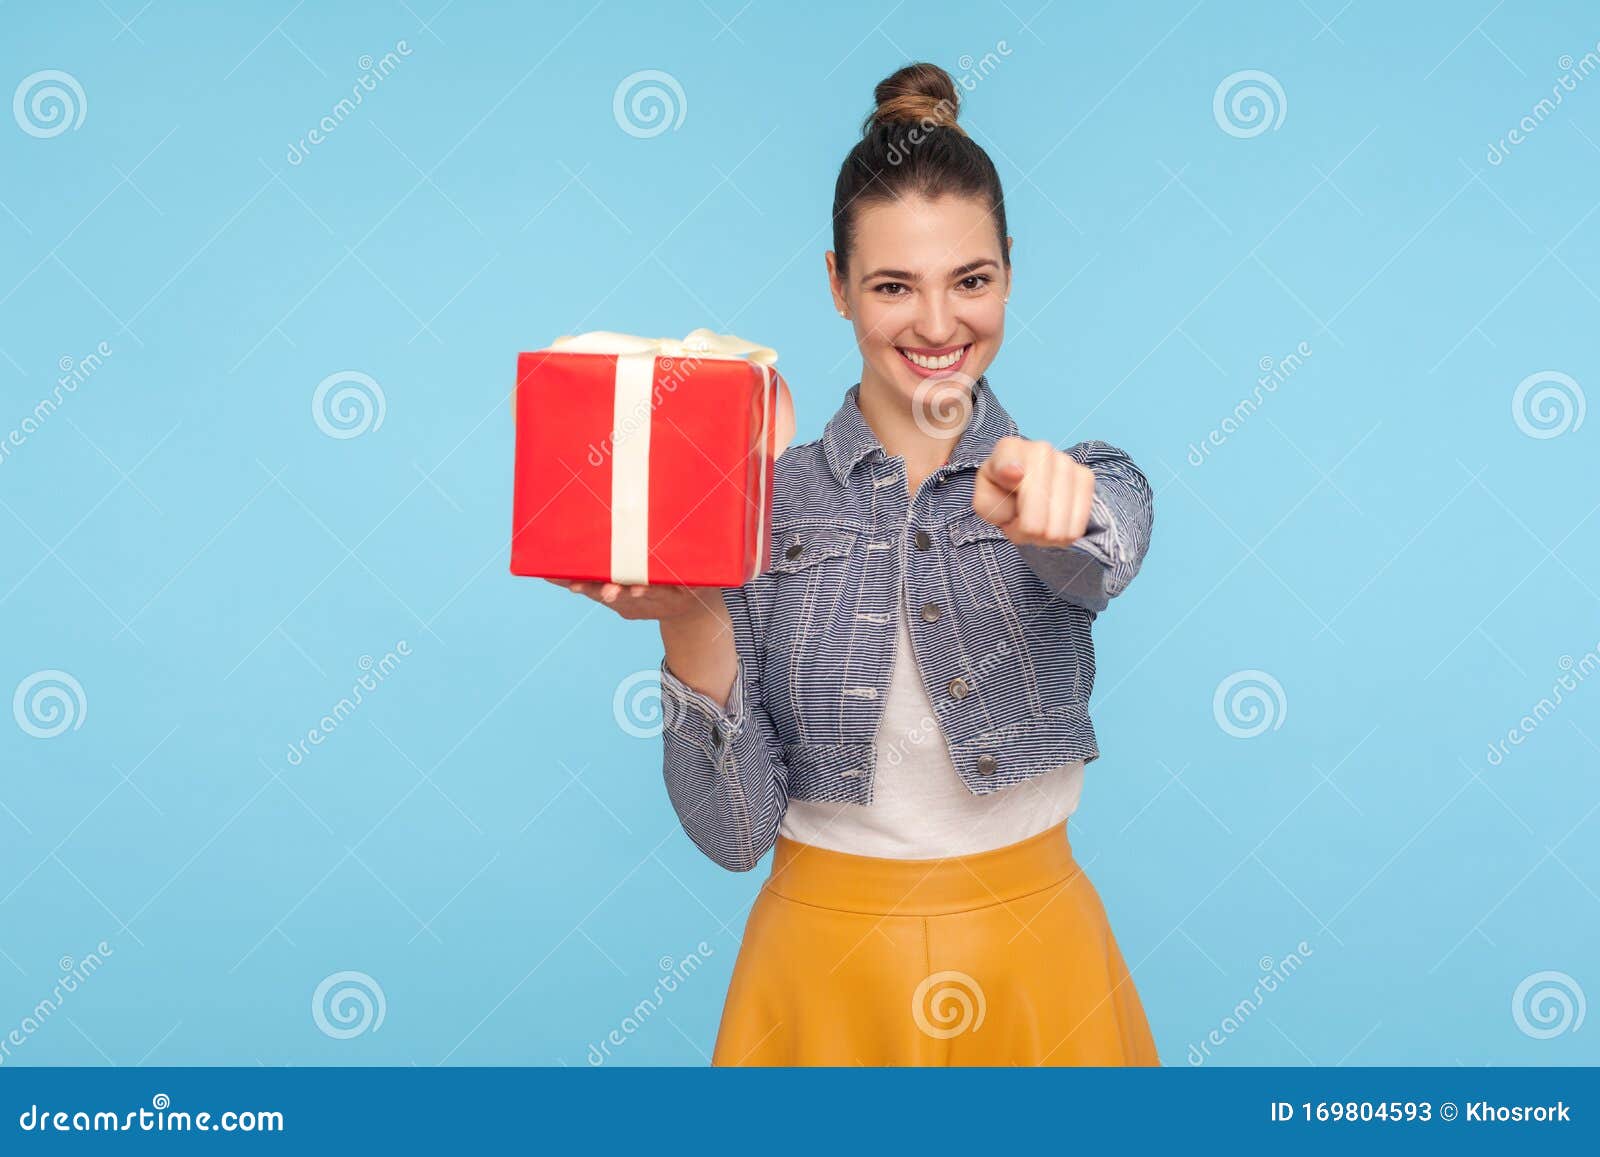 bonus for you, winner! portrait of optimistic beautiful fashionably dressed girl with hair bun holding gift box and pointing to